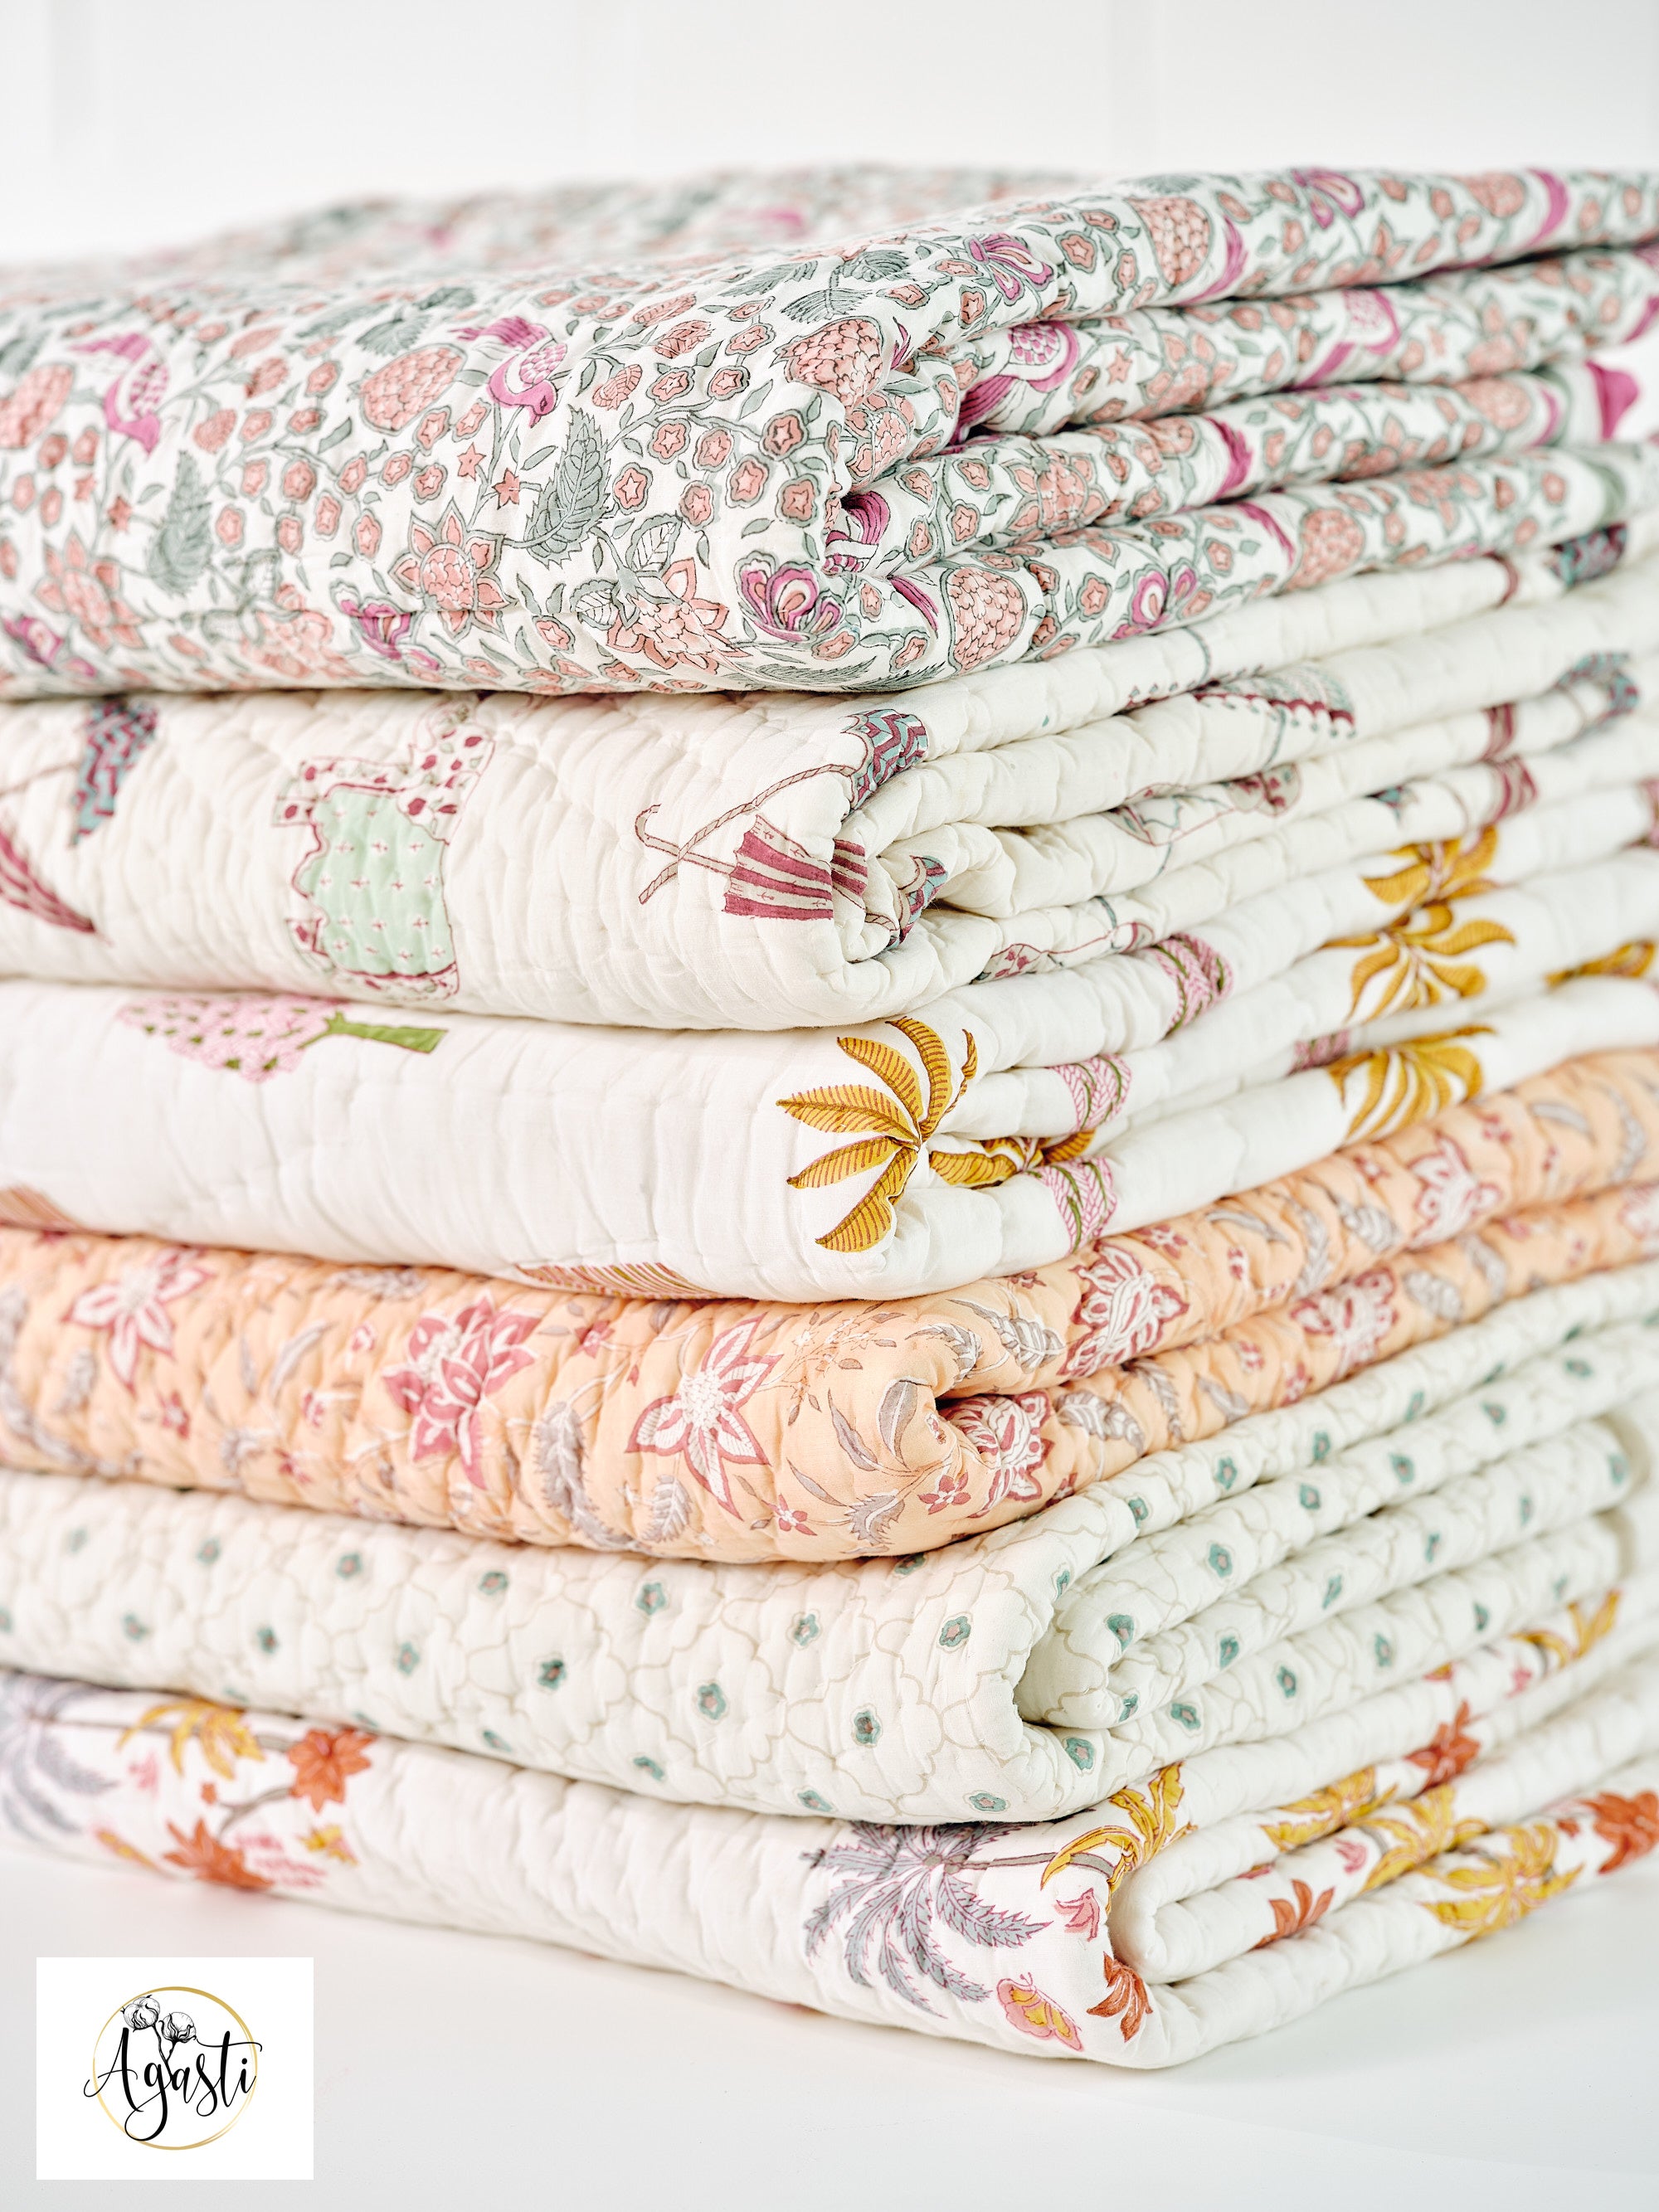 Do you know the difference between Quilt, Duvet, Doona, Comforter, Coverlet and Quilt Cover?